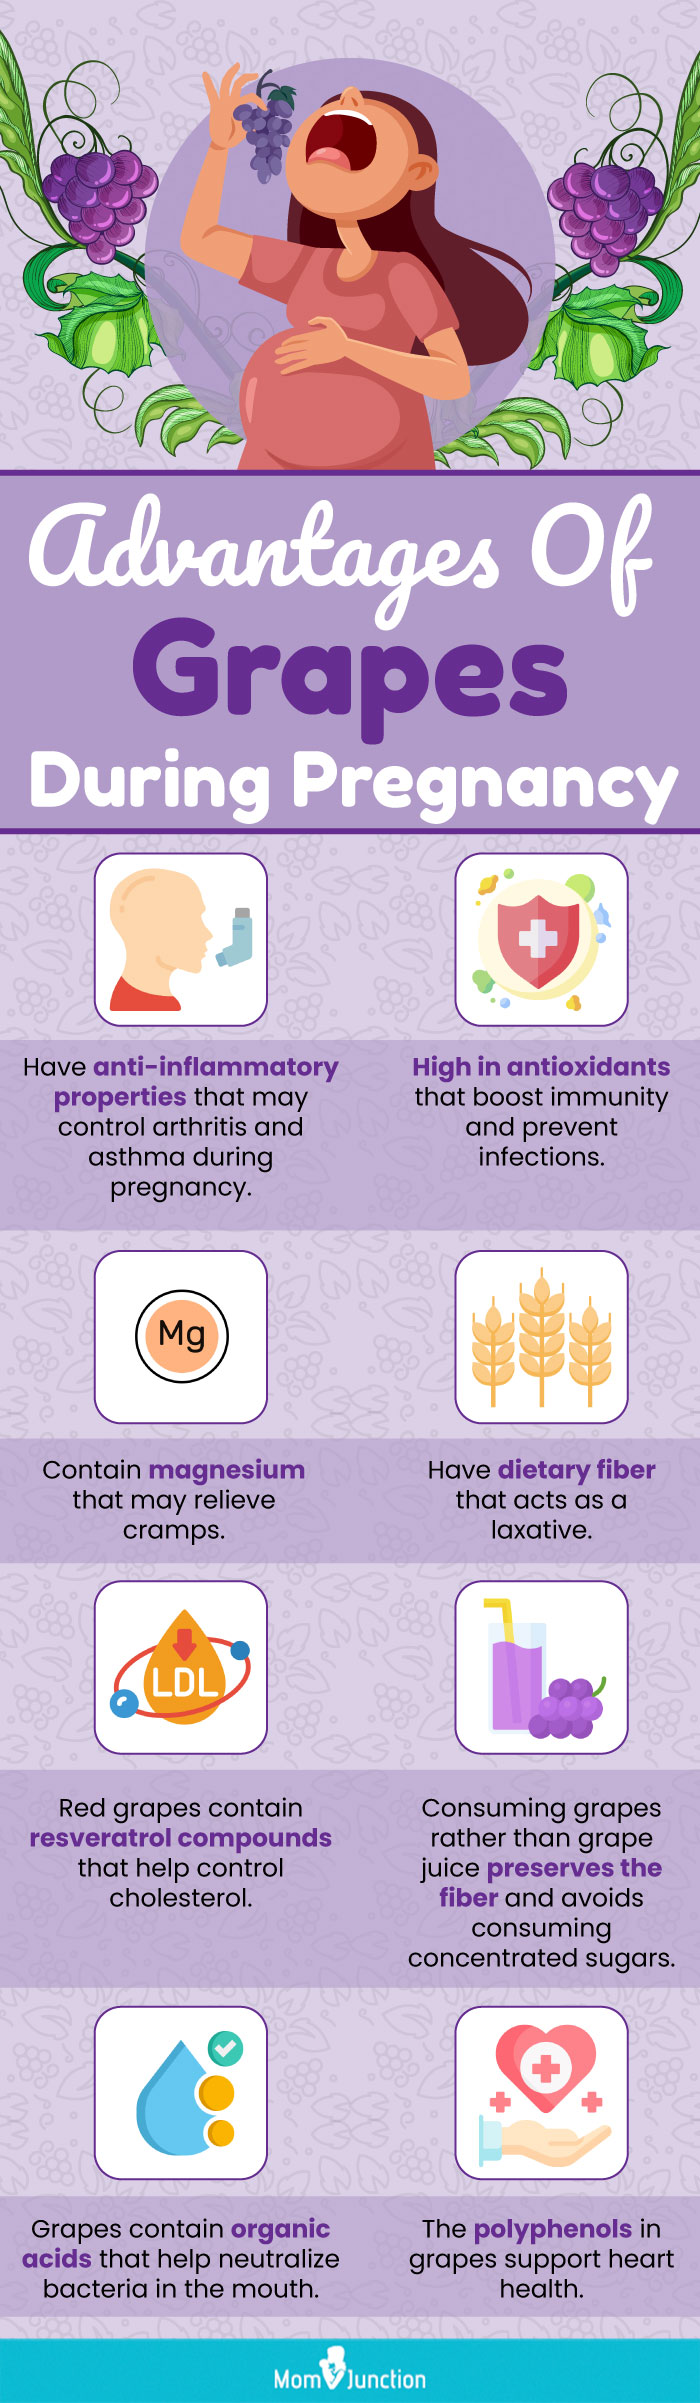 advantages of grapes during pregnancy (infographic)